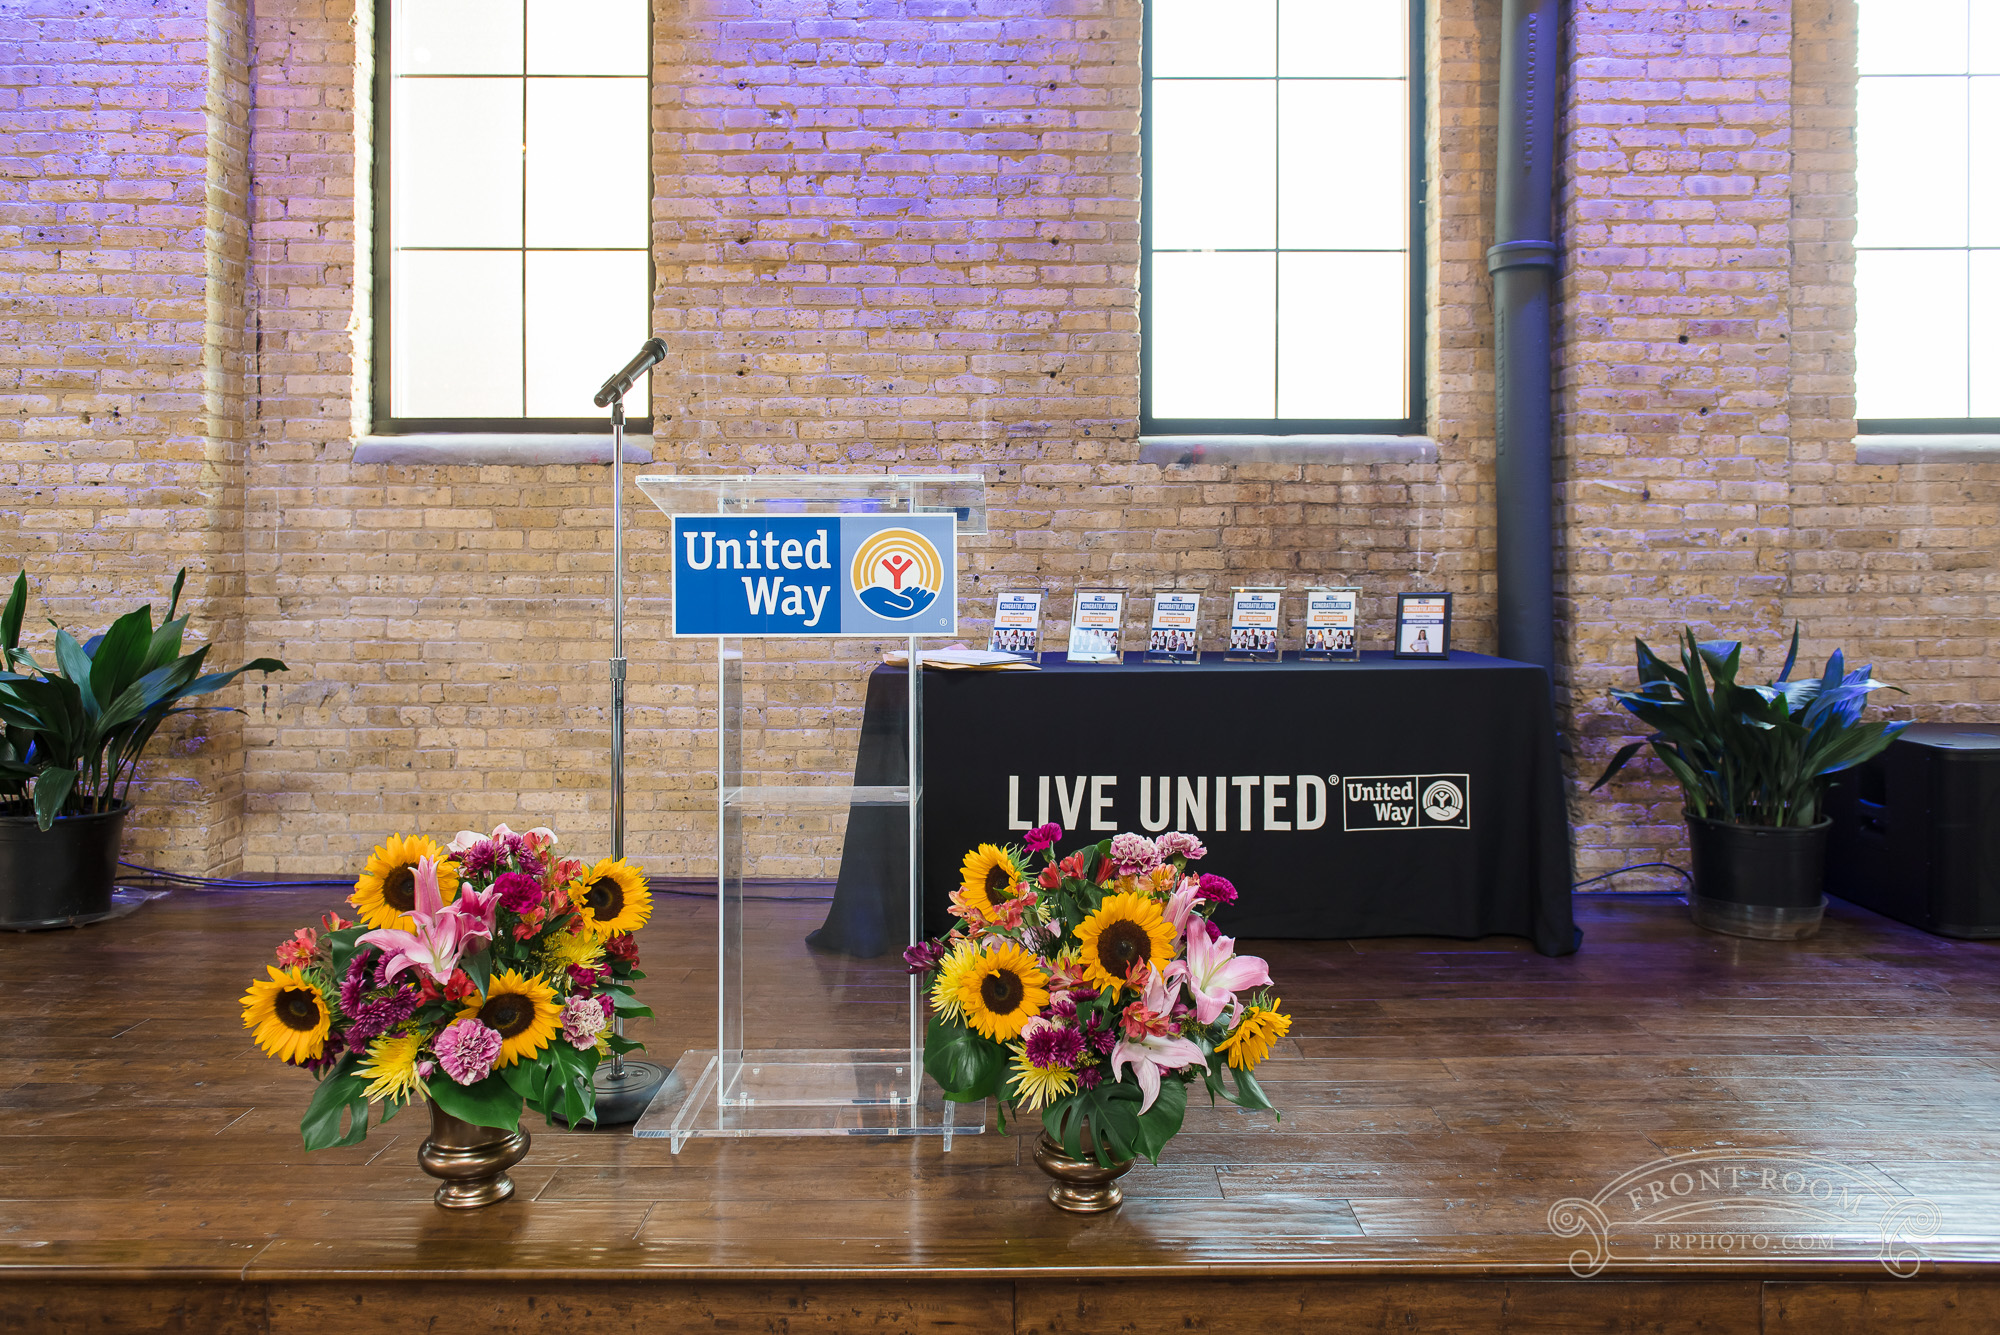 United Way, United Way P5 Awards, Front Room Studios, Ivy House